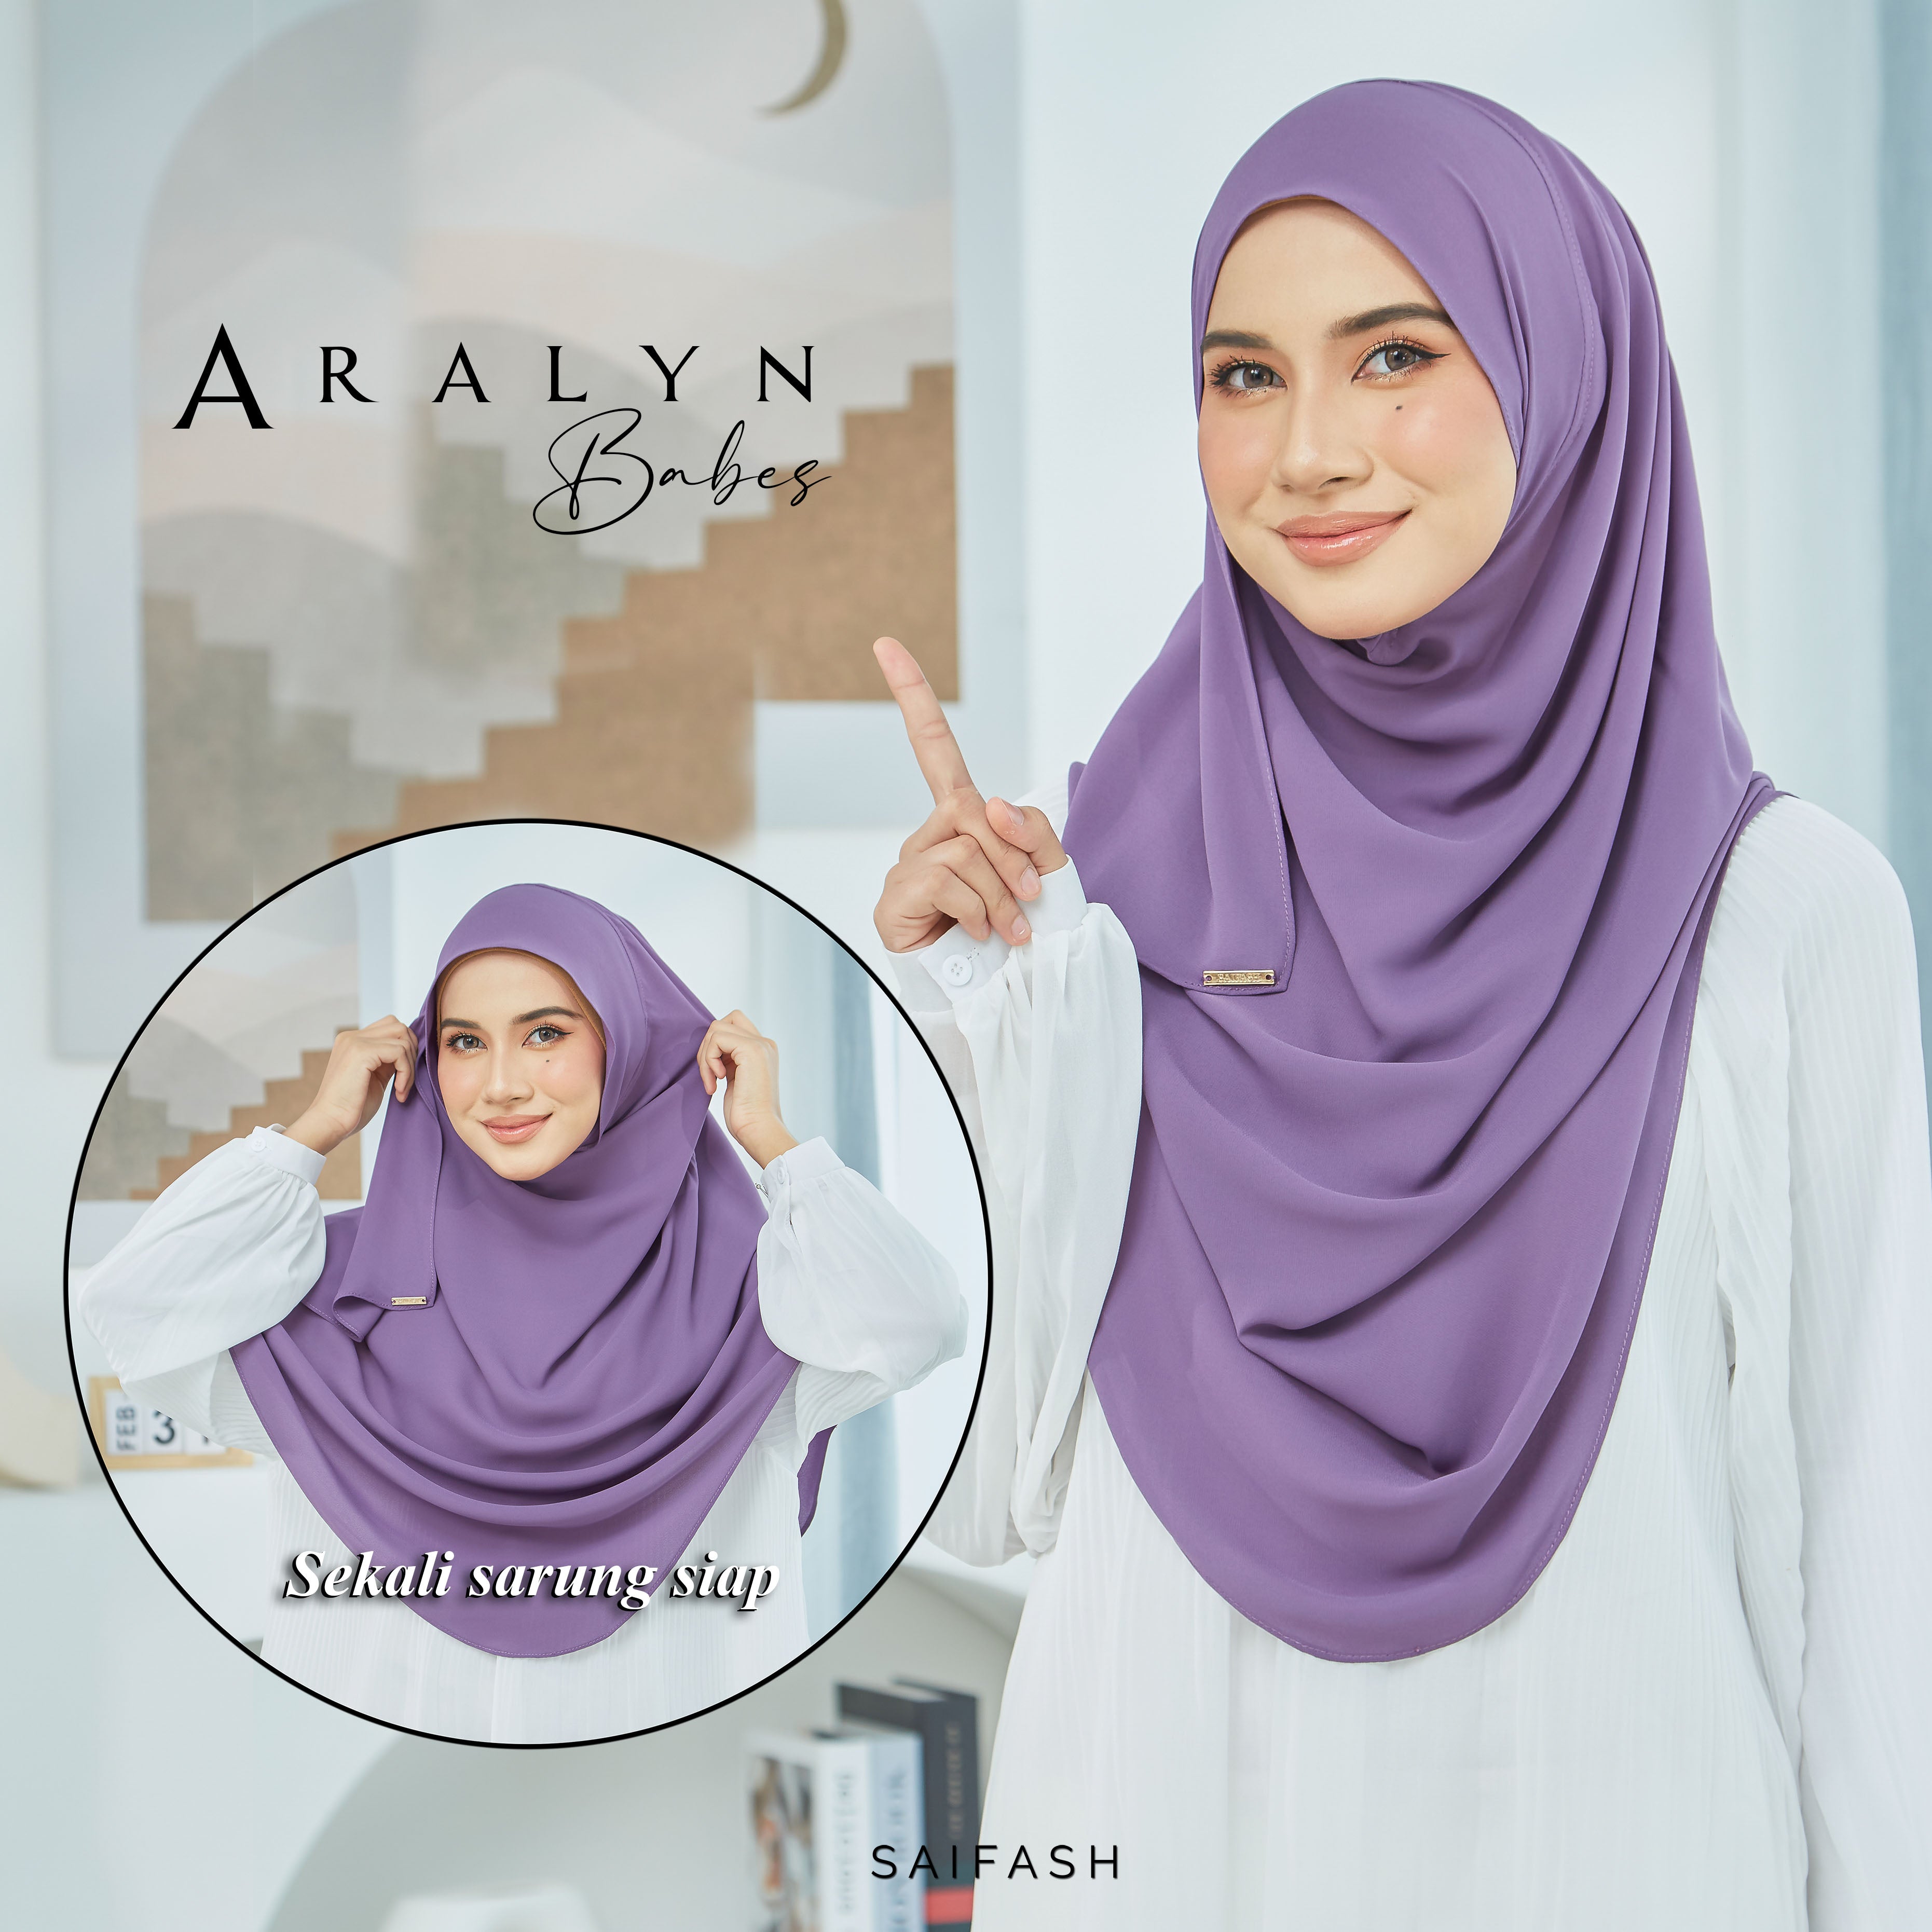 Aralyn Babes Instant Hijab in Lavender